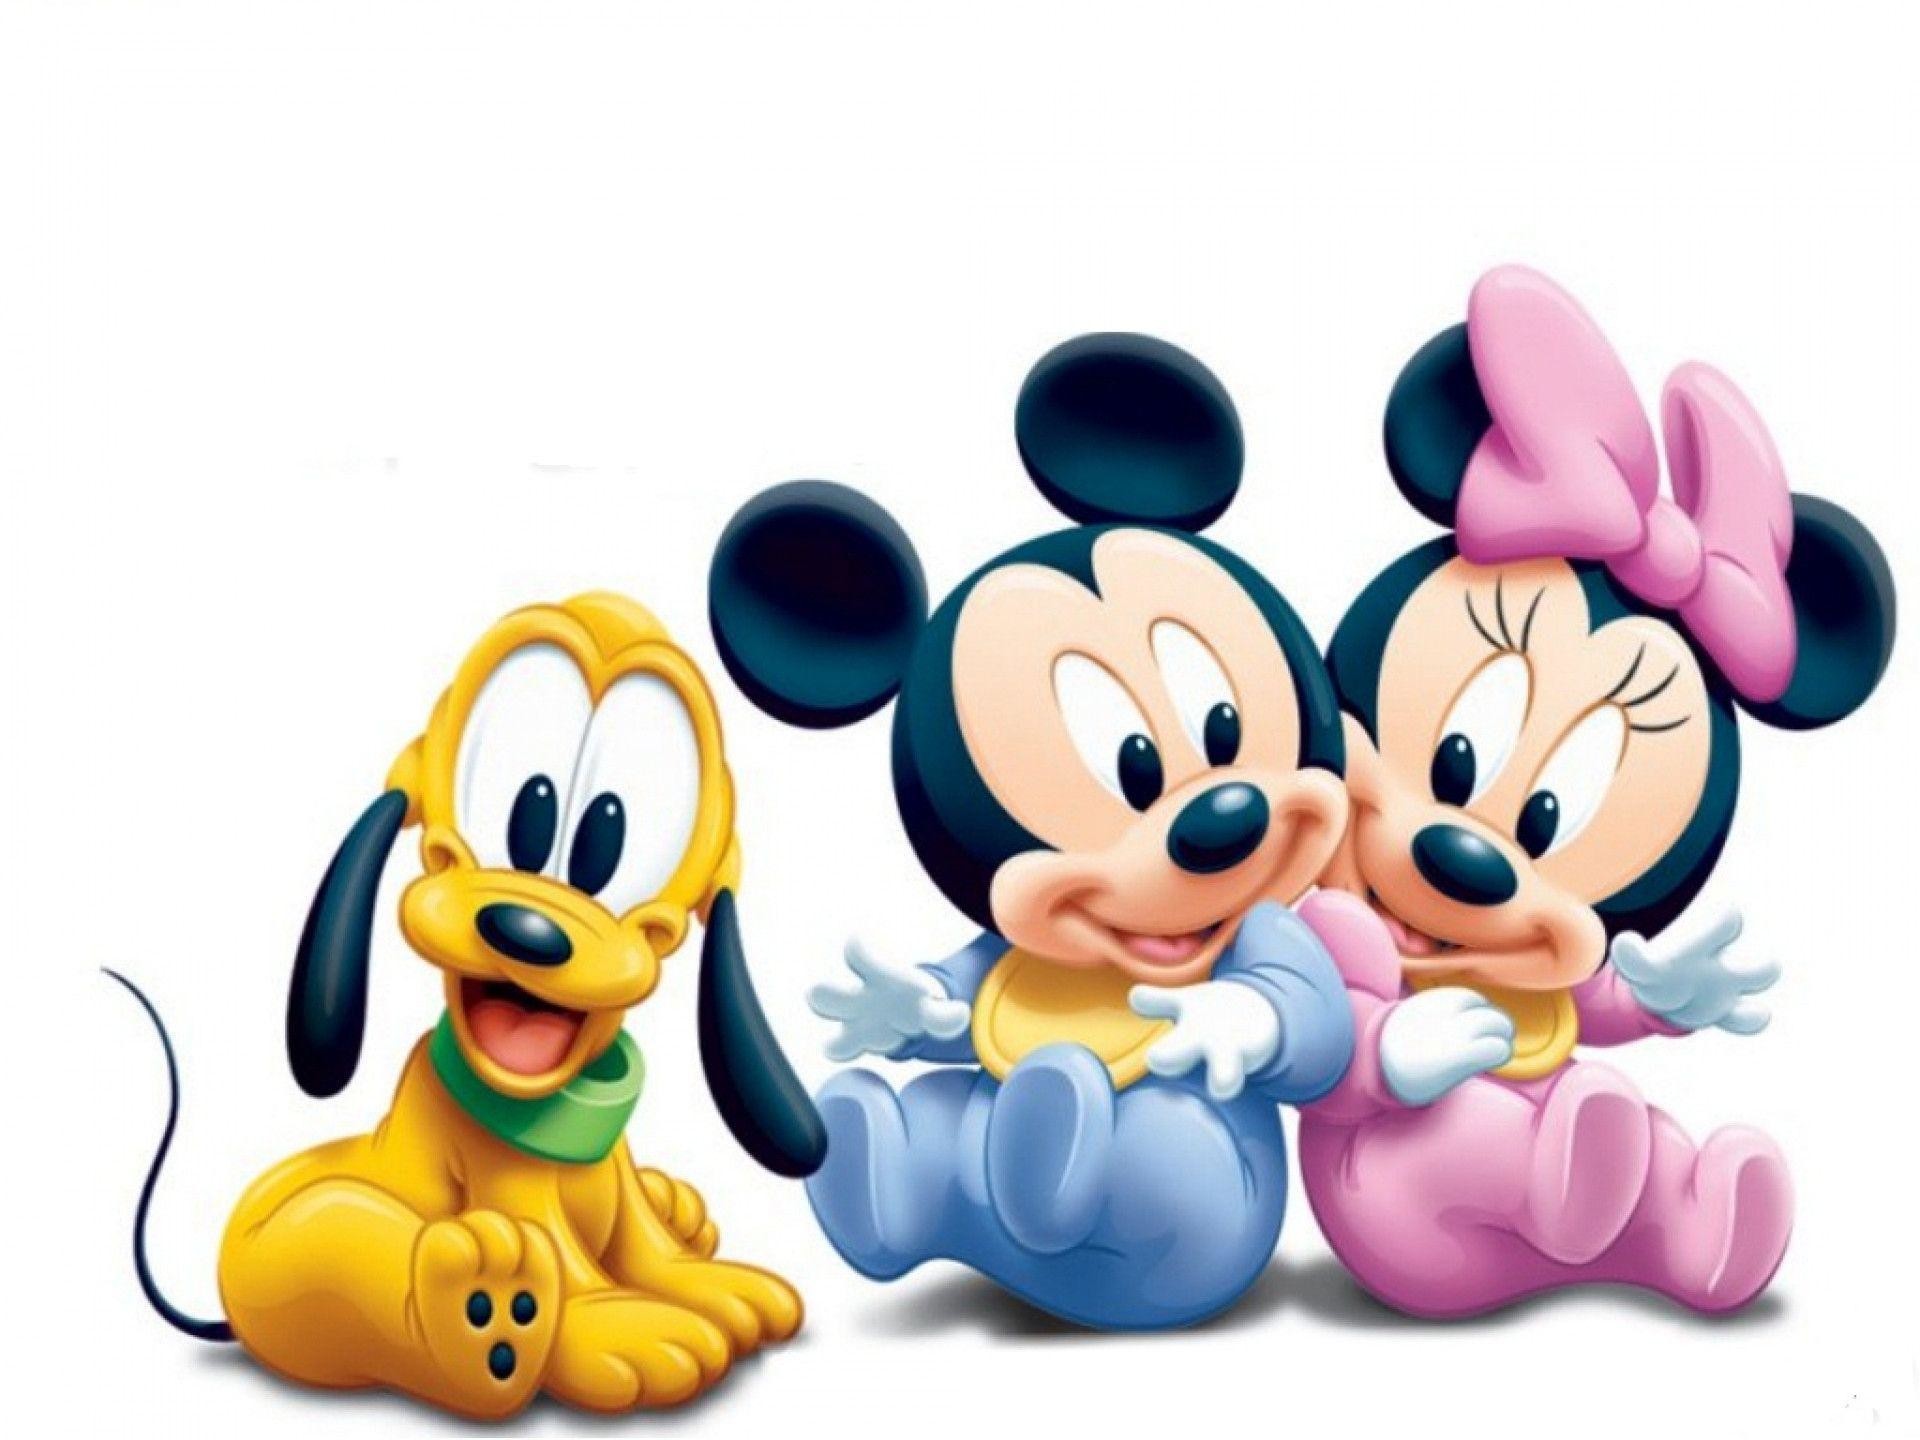 1920x1440 Baby Mickey Mouse, Goofy And Minnie Mouse Cartoon Wallpaper #1747 .